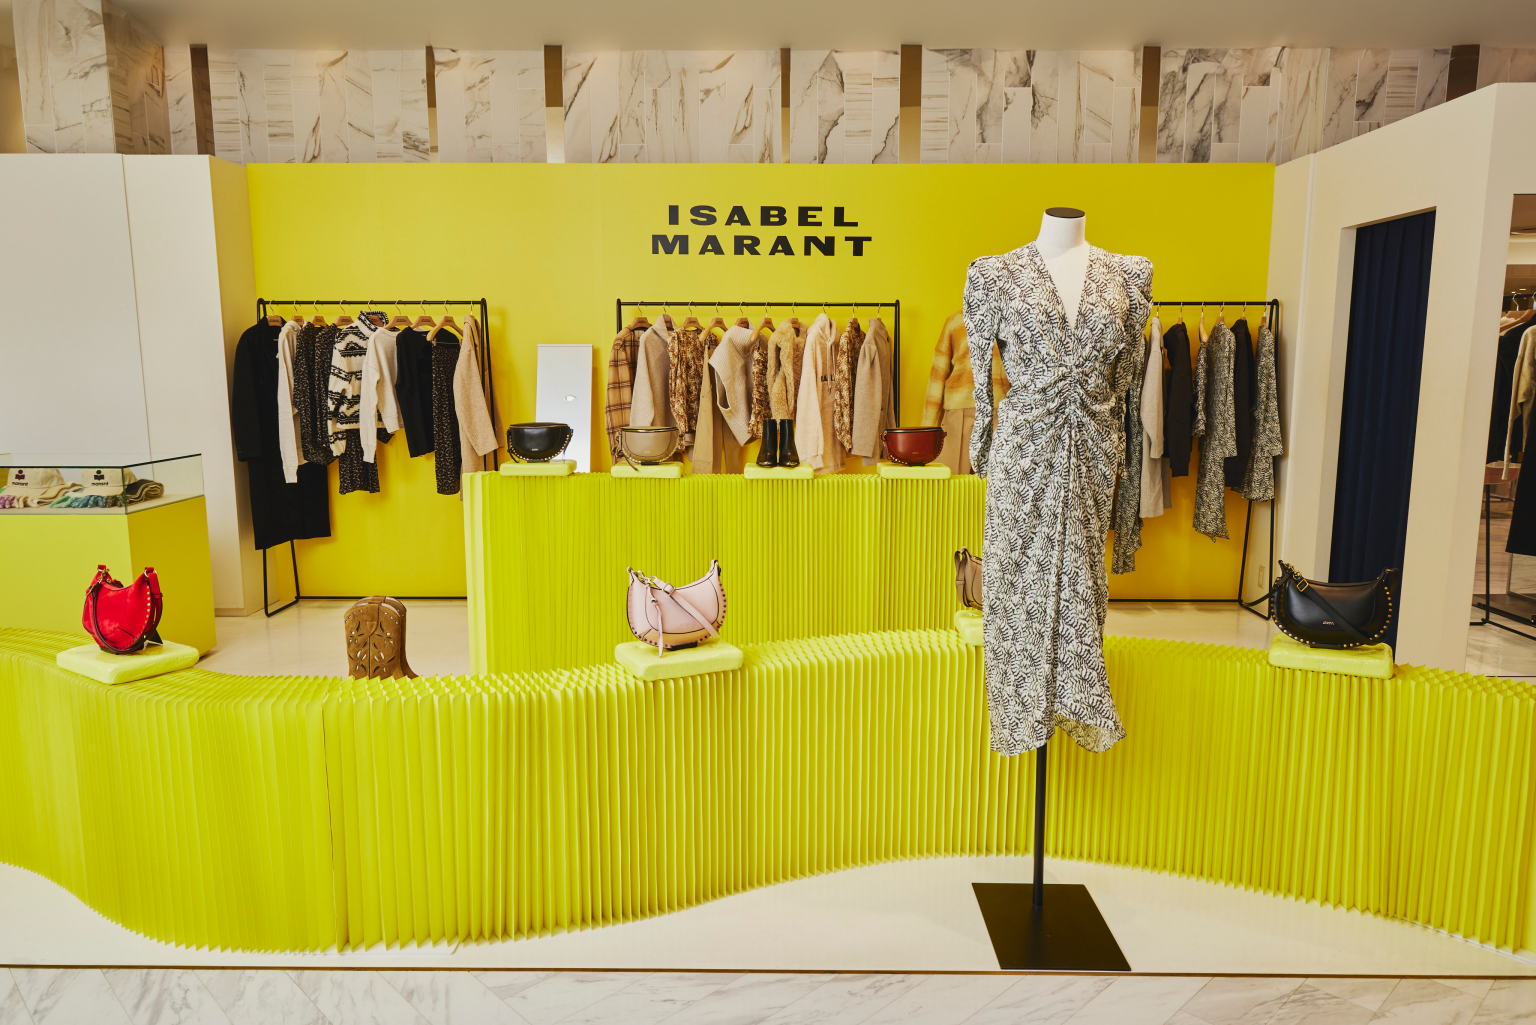 Image of yellow display area featuring the Isabel Marant clothing collection with a ruched and printed midi dress displayed in the foreground.